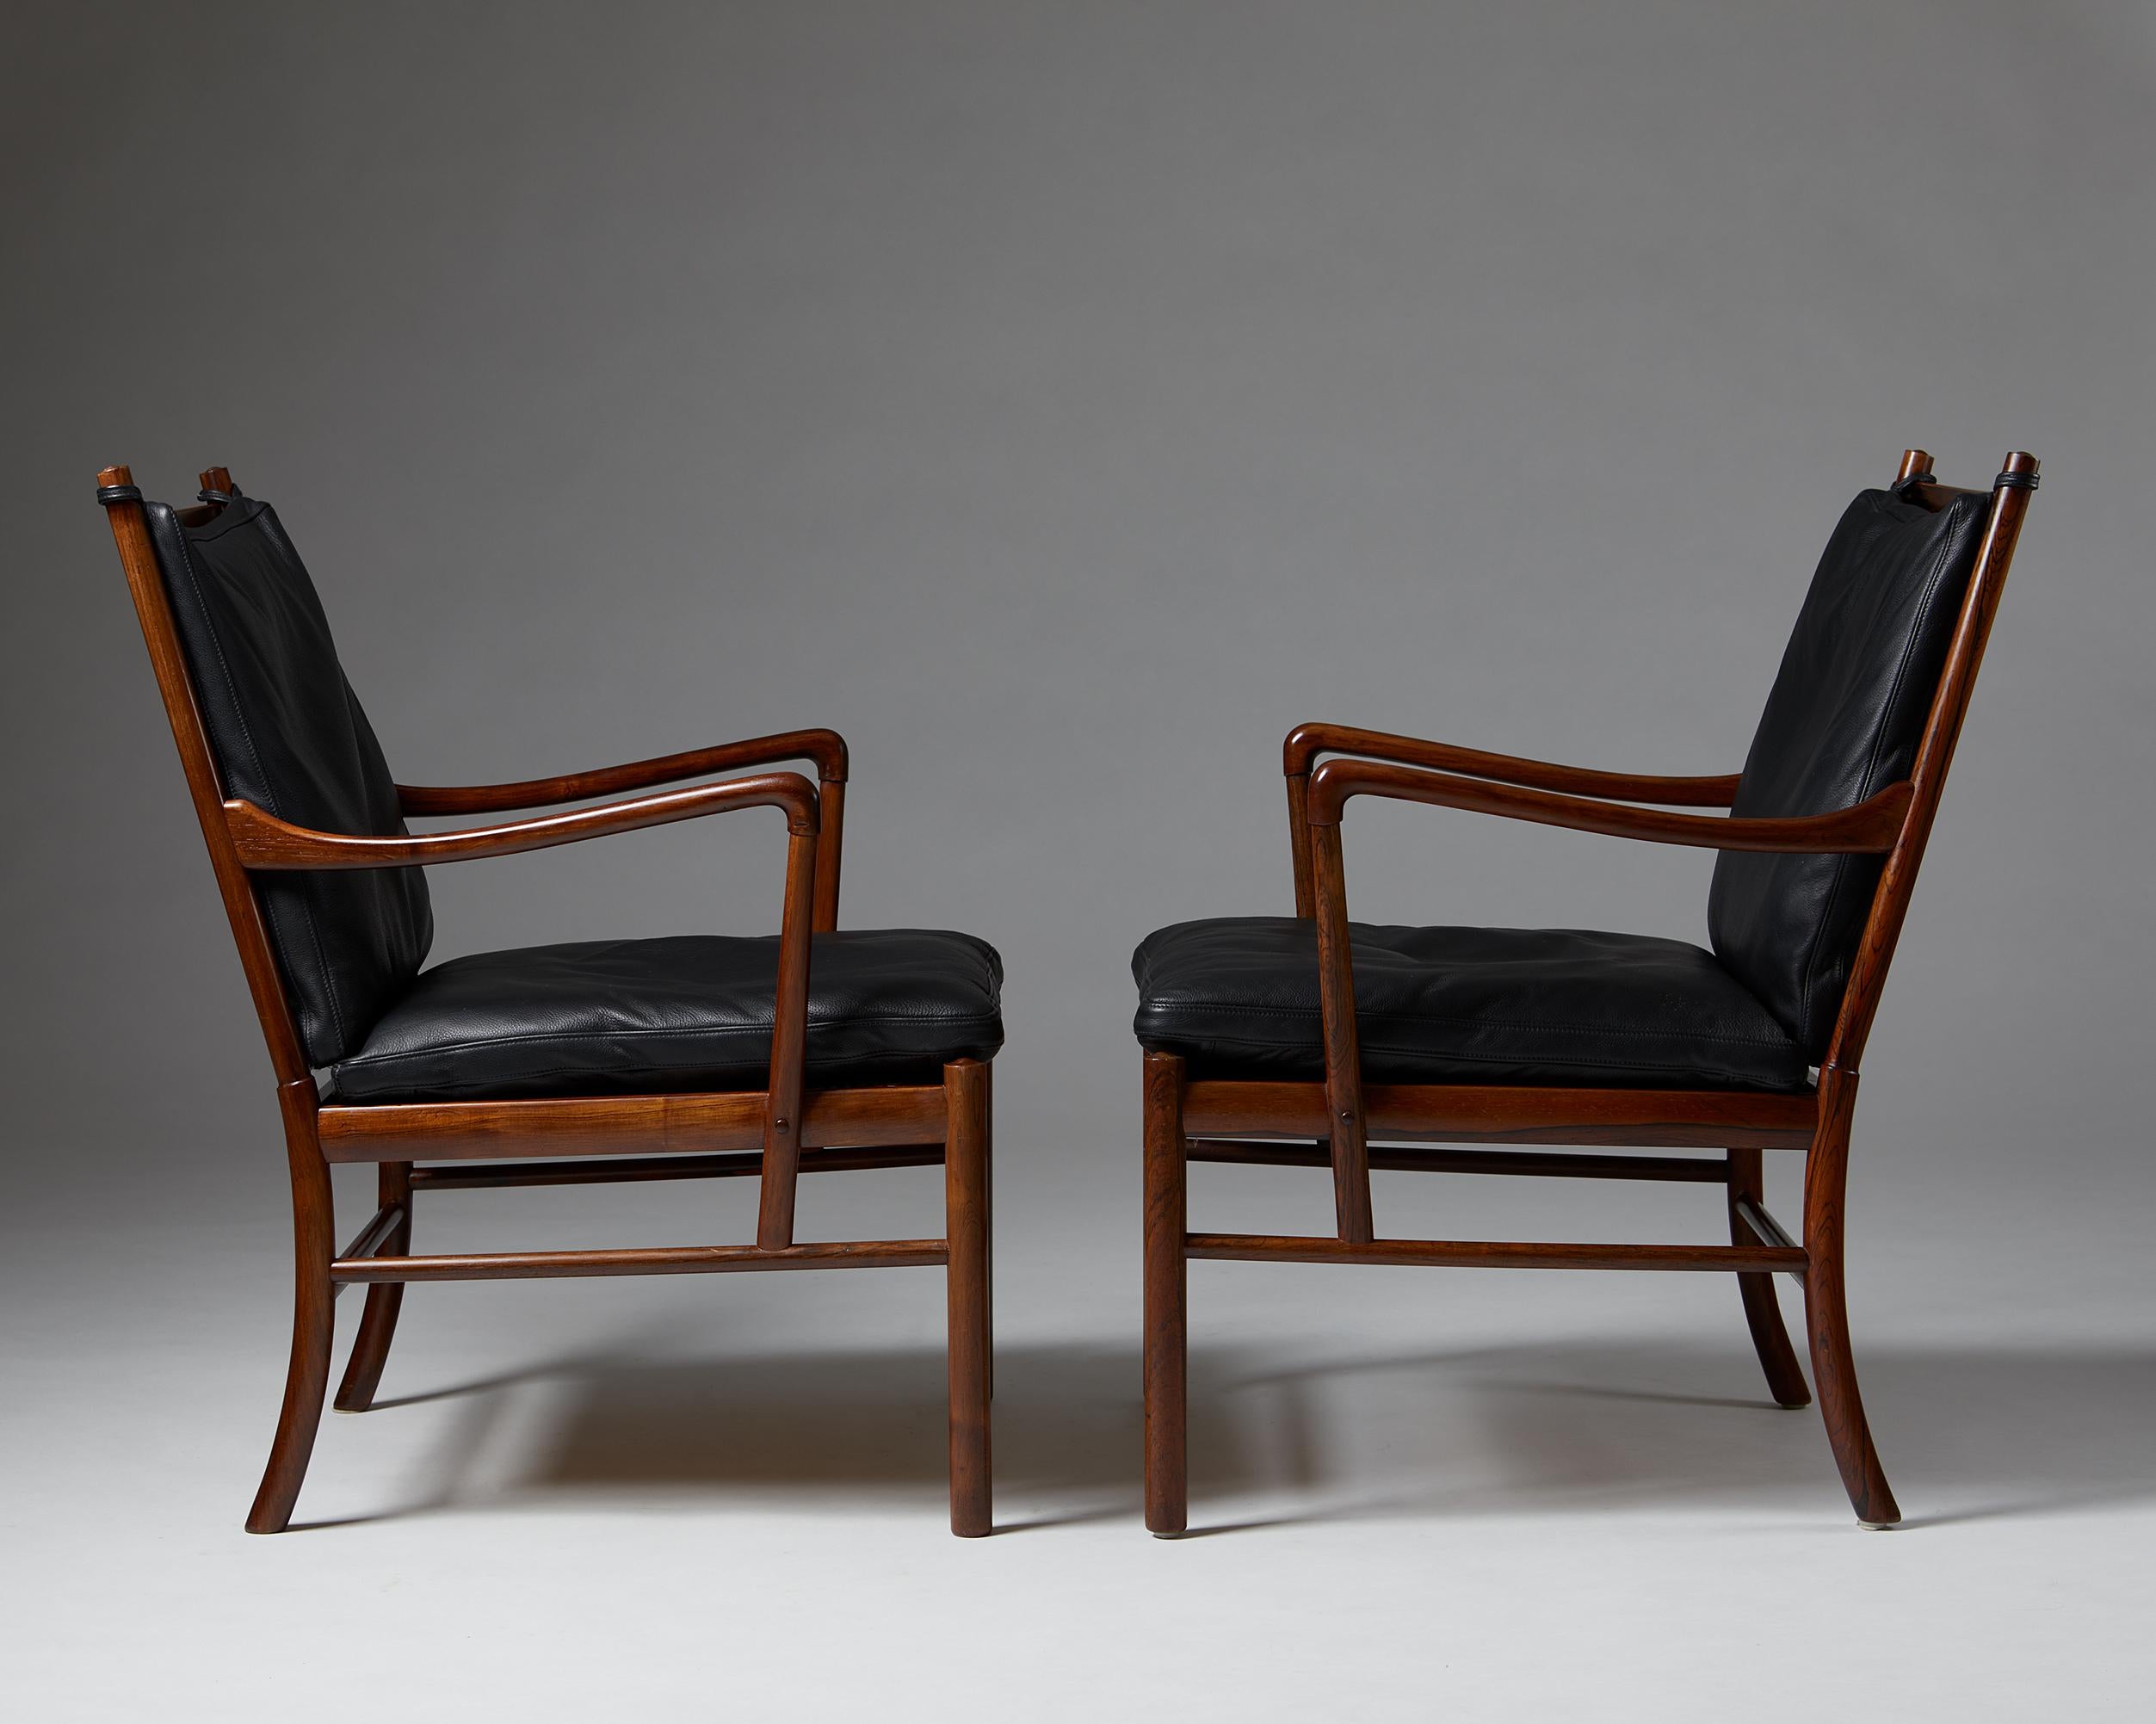 Danish Pair of Colonial Chairs Model PJ 149 Designed by Ole Wanscher for Poul Jeppesen